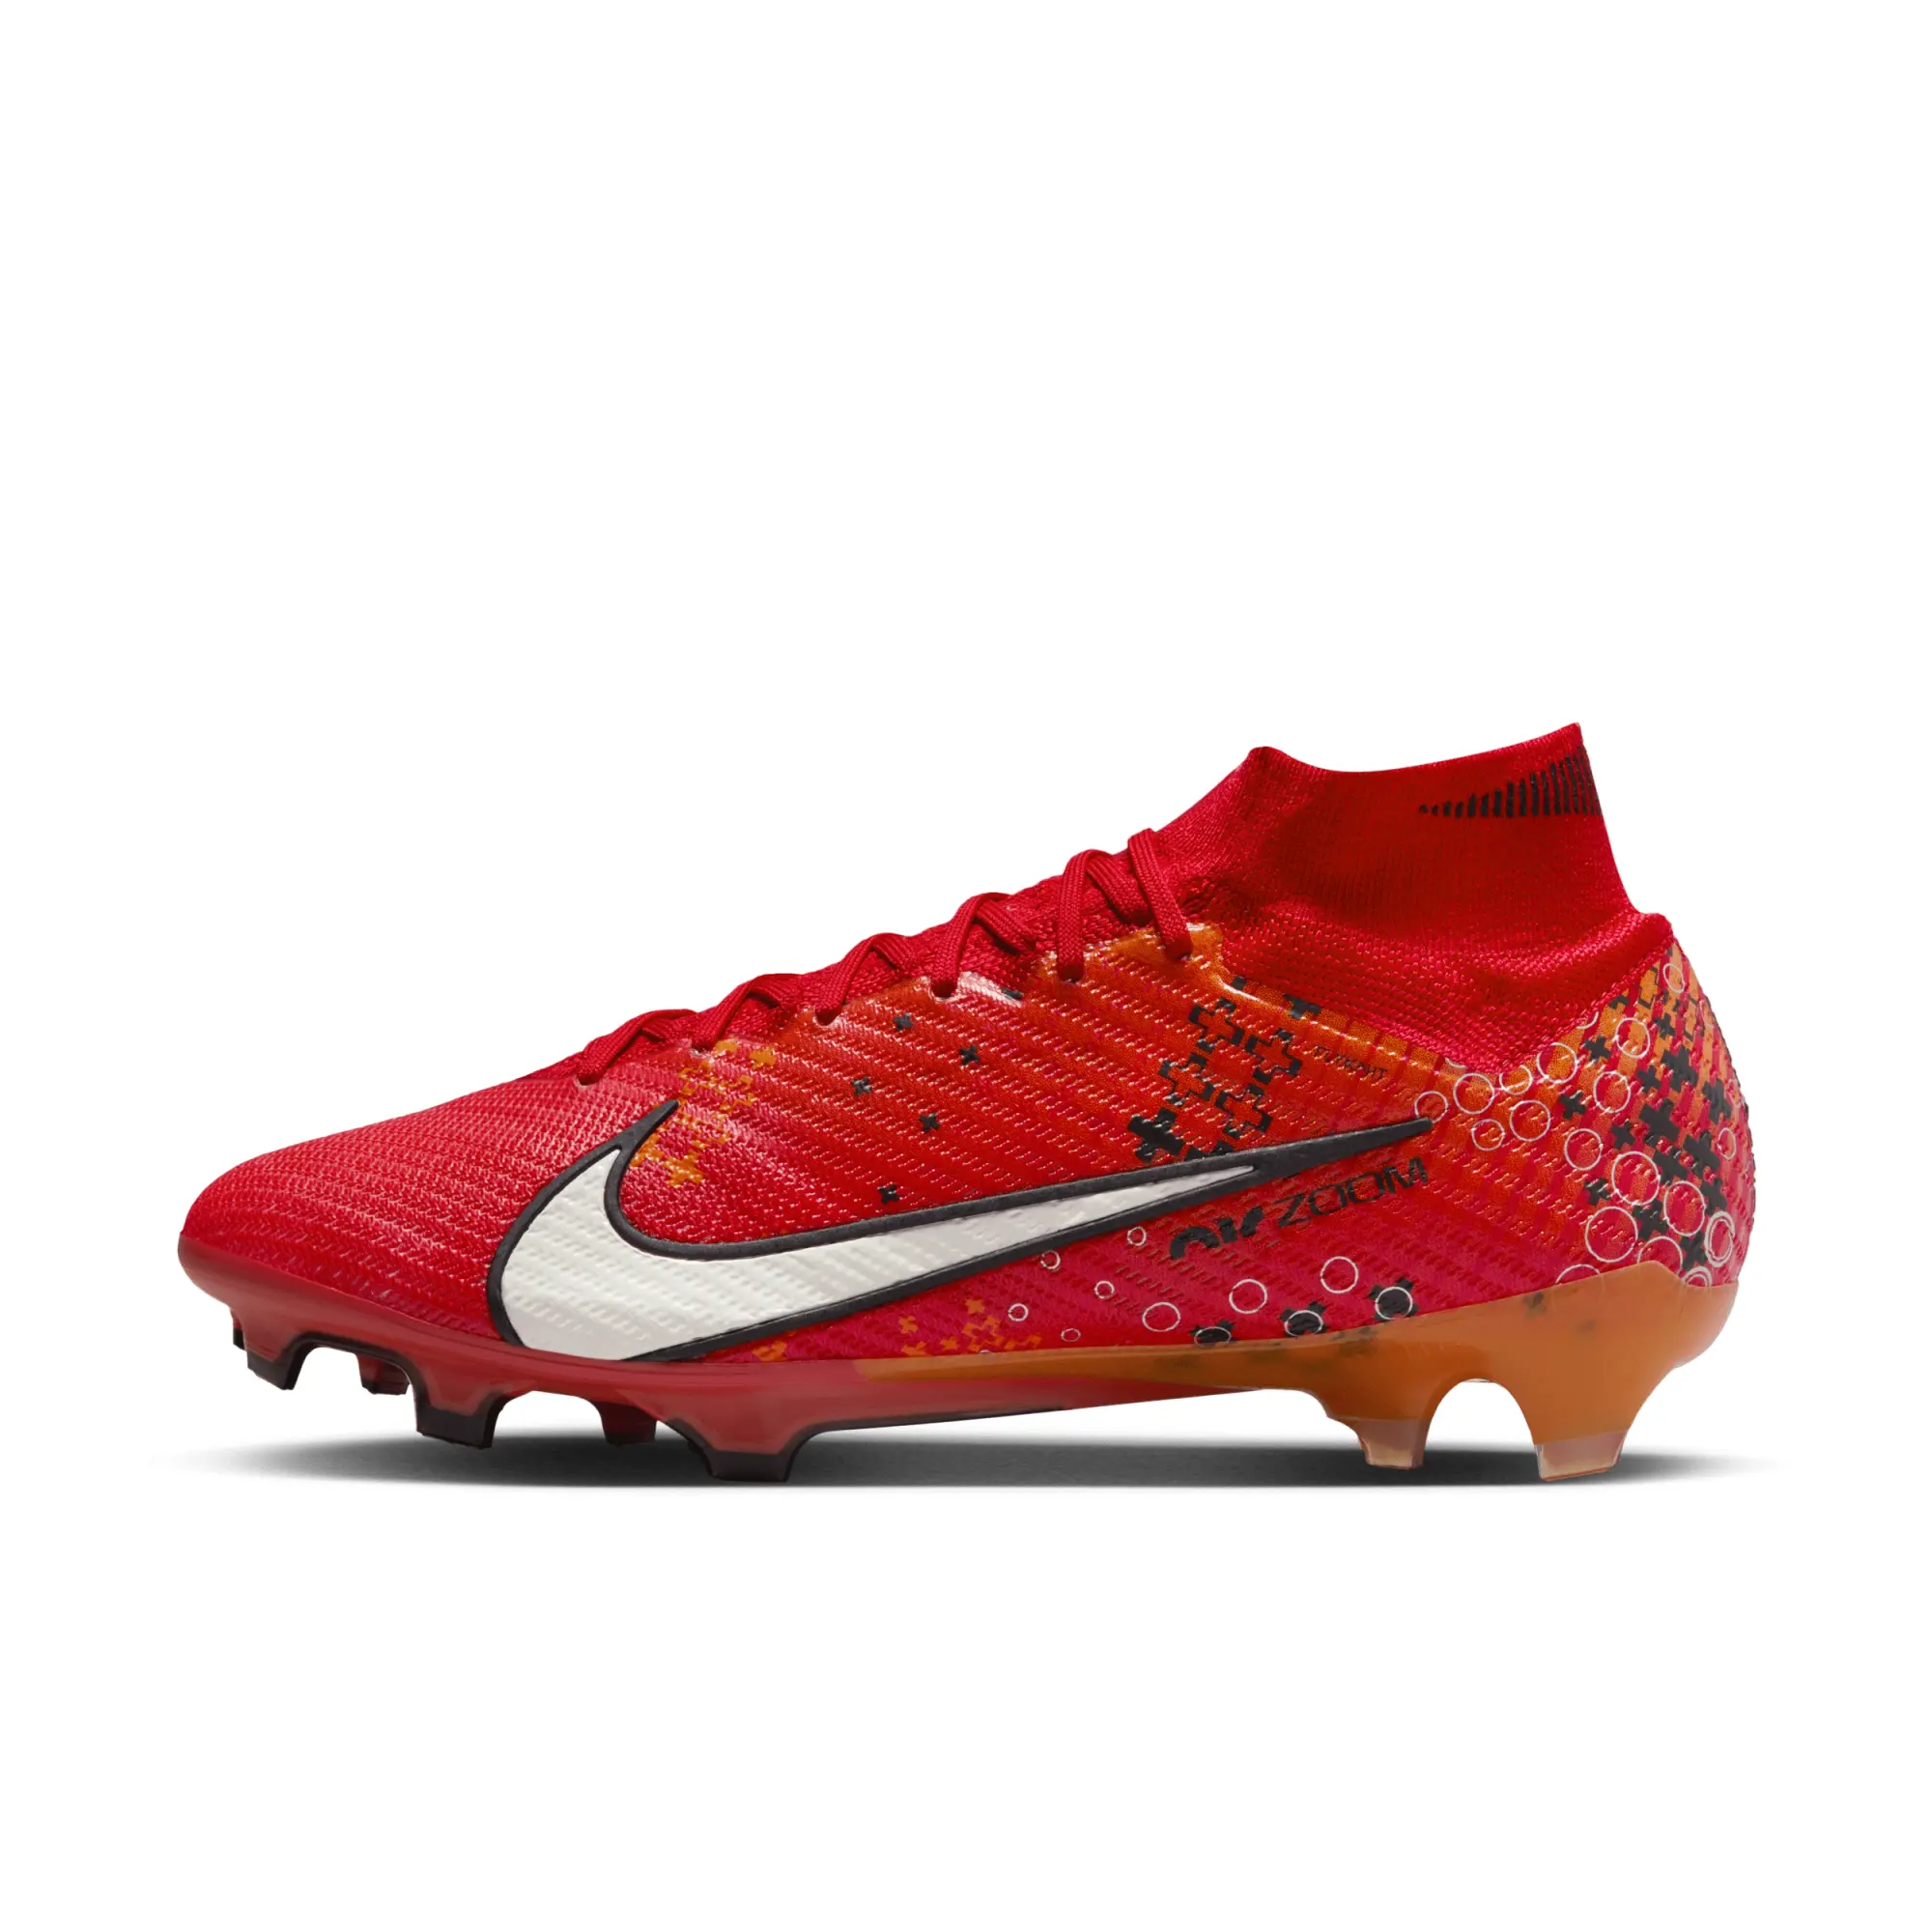 Nike Superfly 9 Elite Mercurial Dream Speed FG High-Top Football Boot - Red